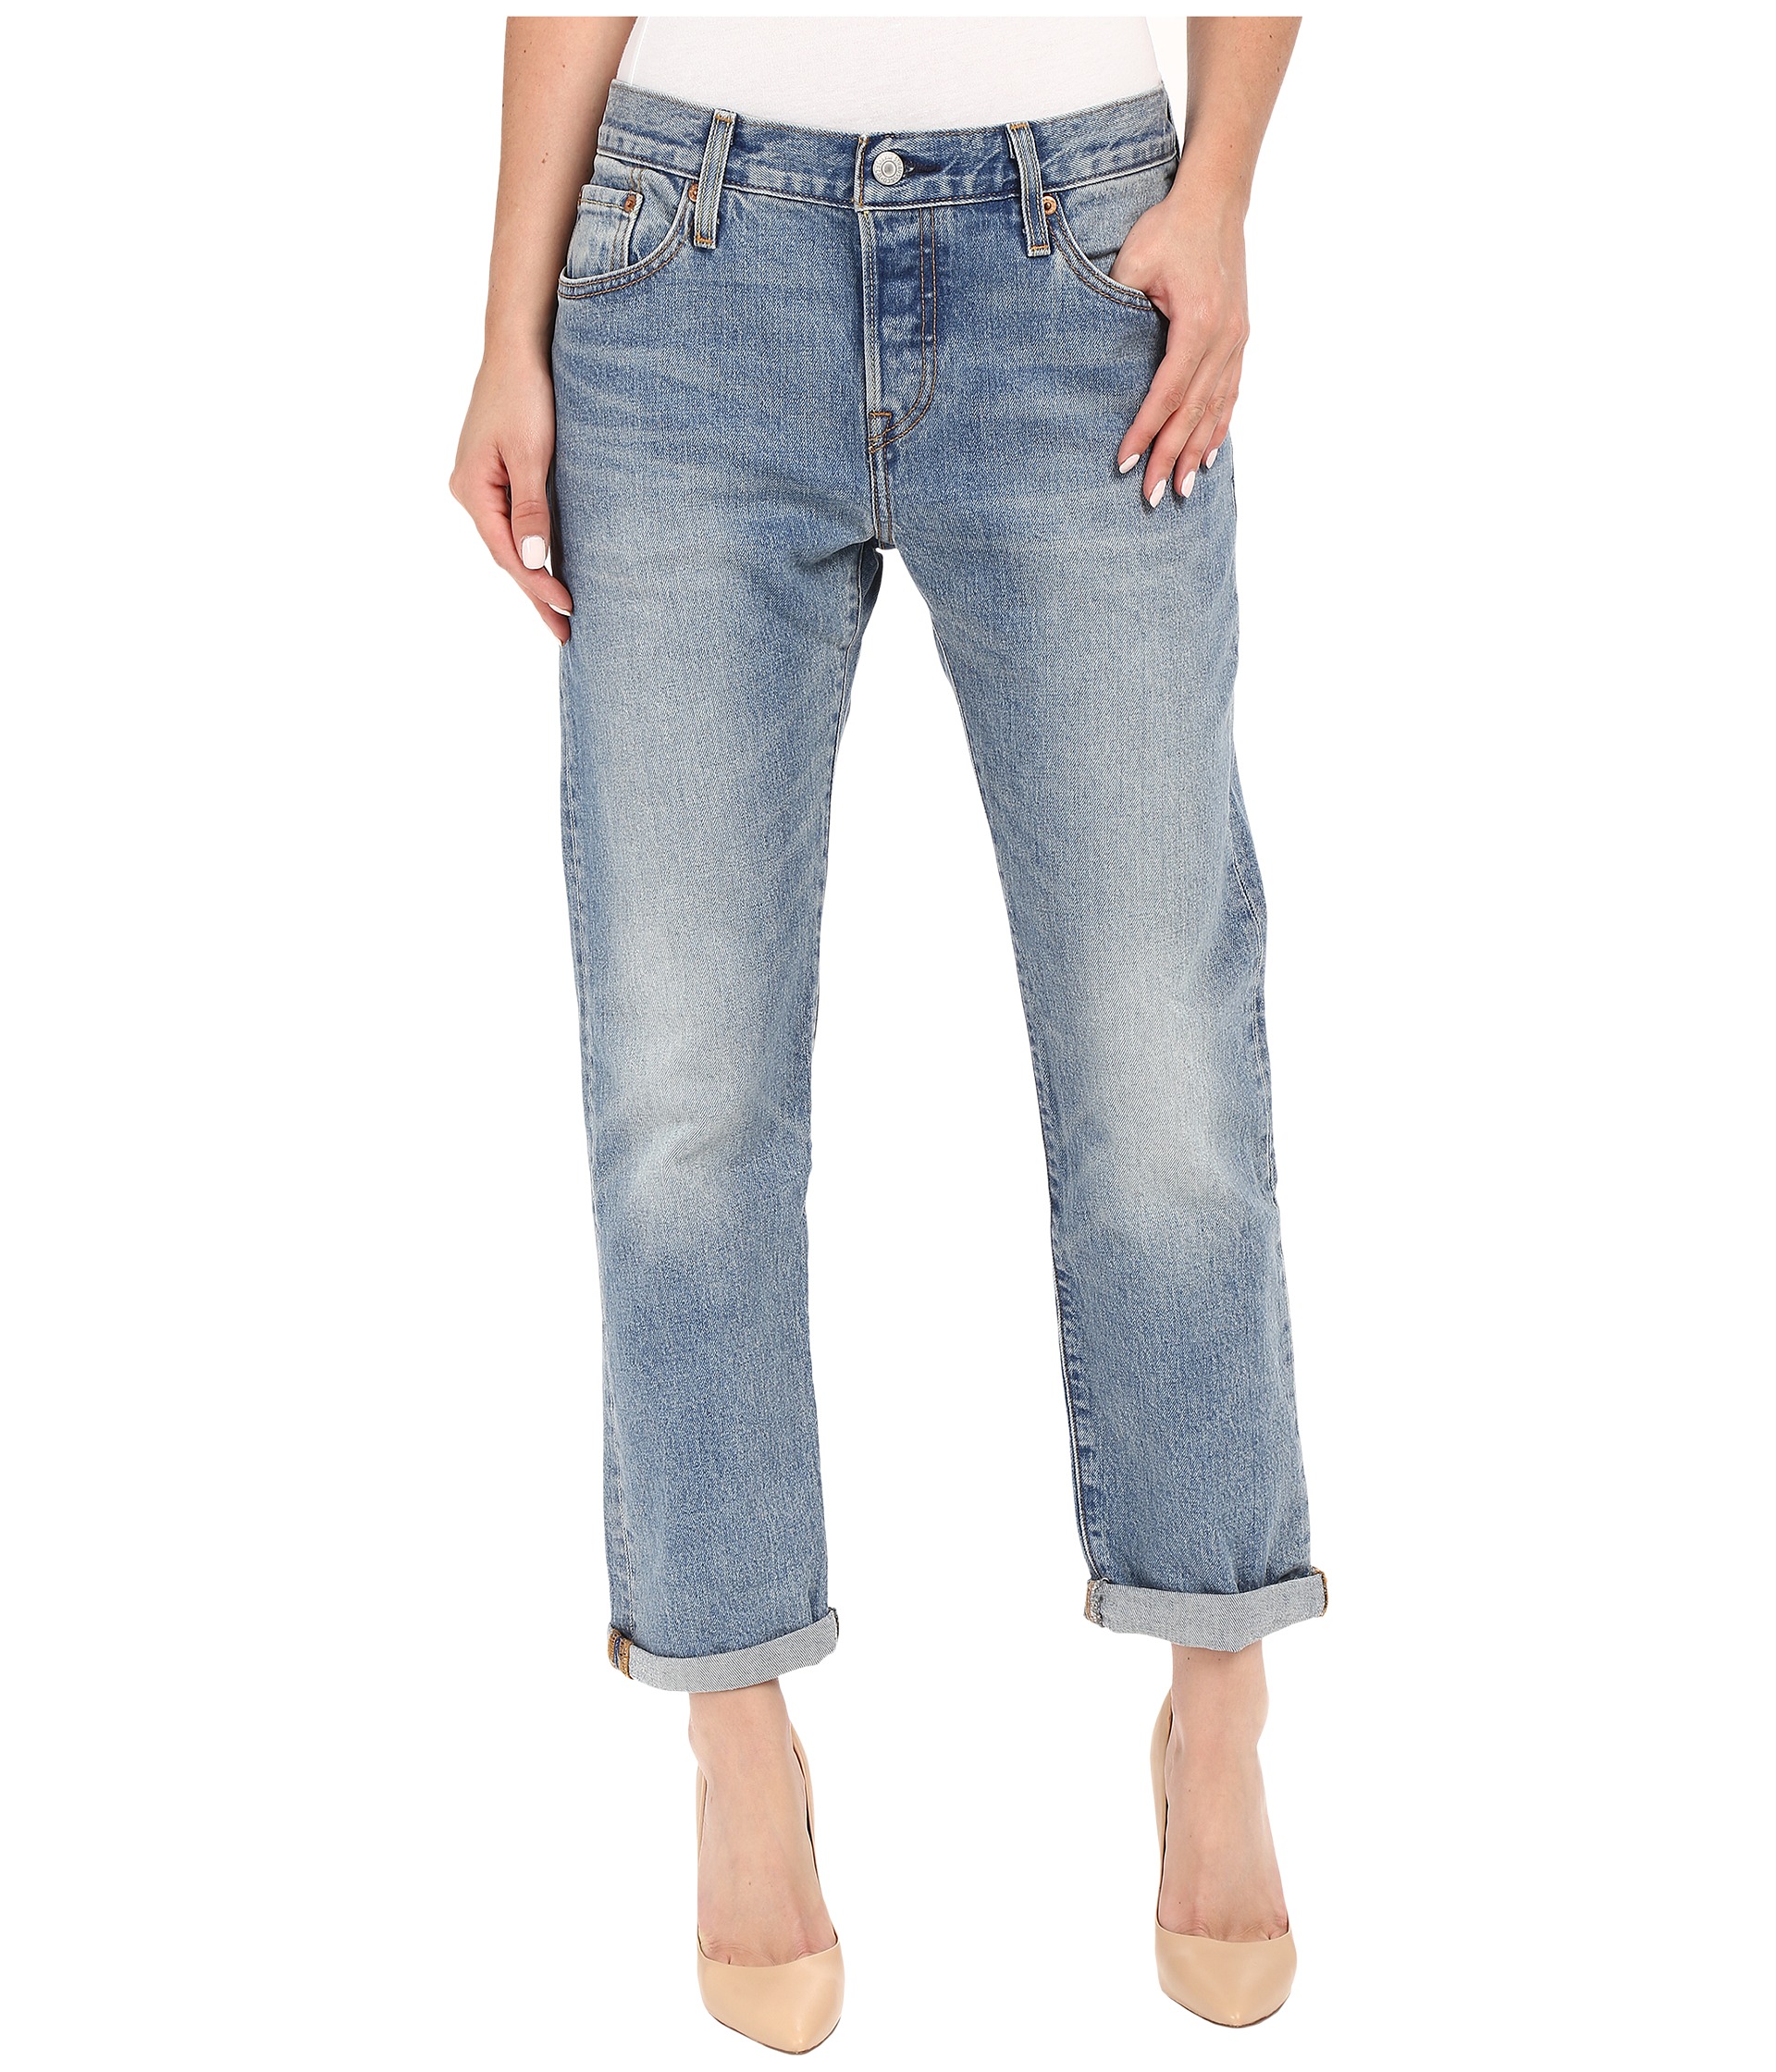 Levi's® Womens 501® Customized and Tapered Jeans at Zappos.com